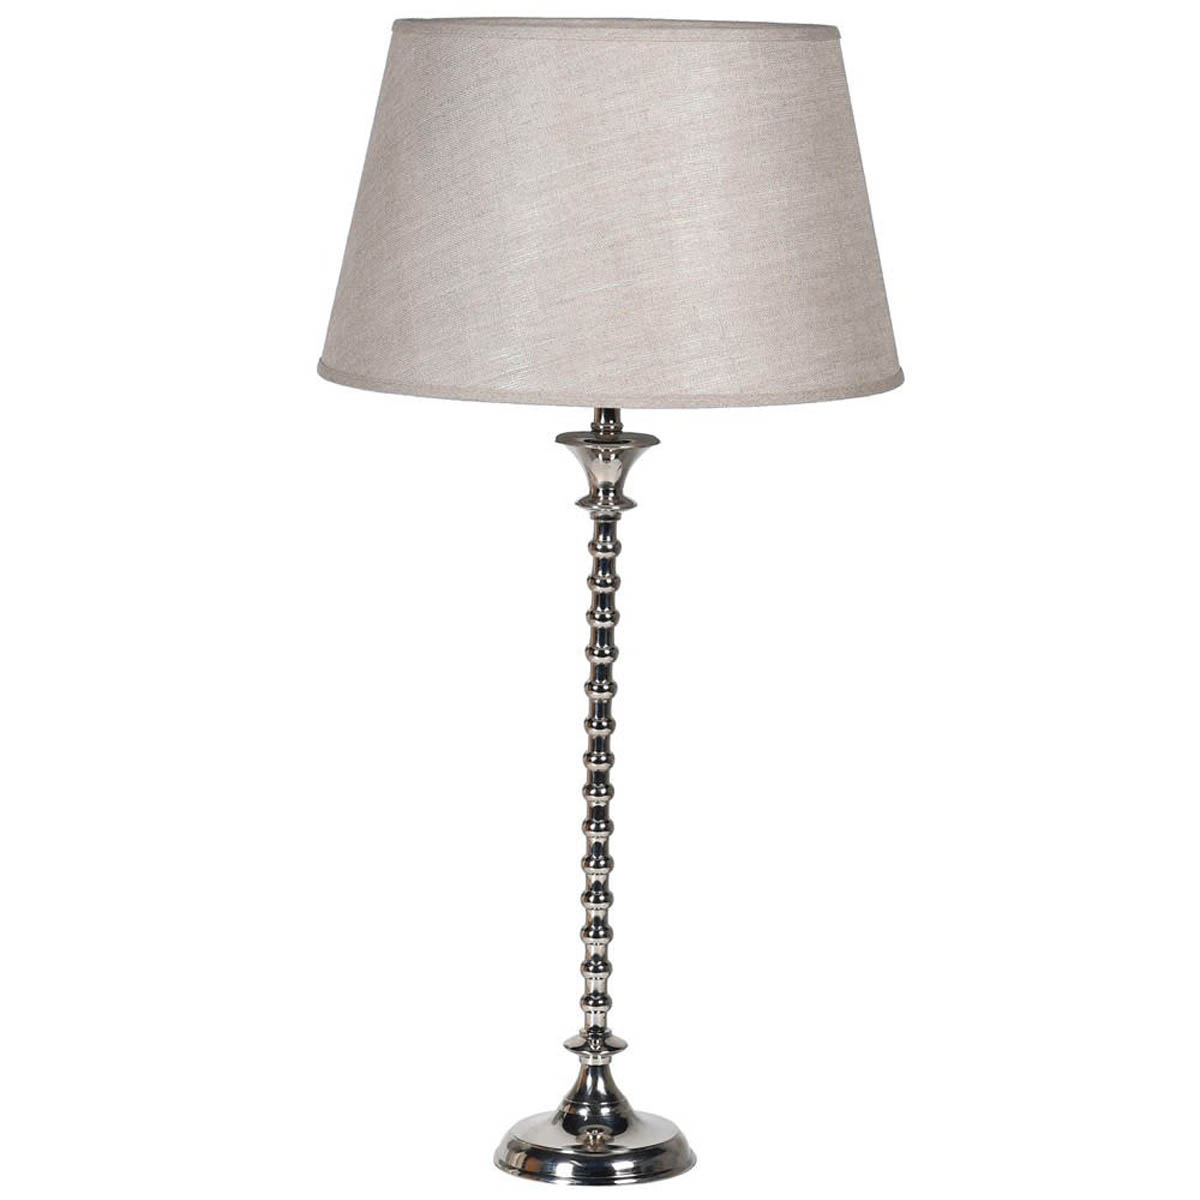 Tall Slim Silver Table Lamp Interior, Tall Thin Silver Table Lamp Living Room